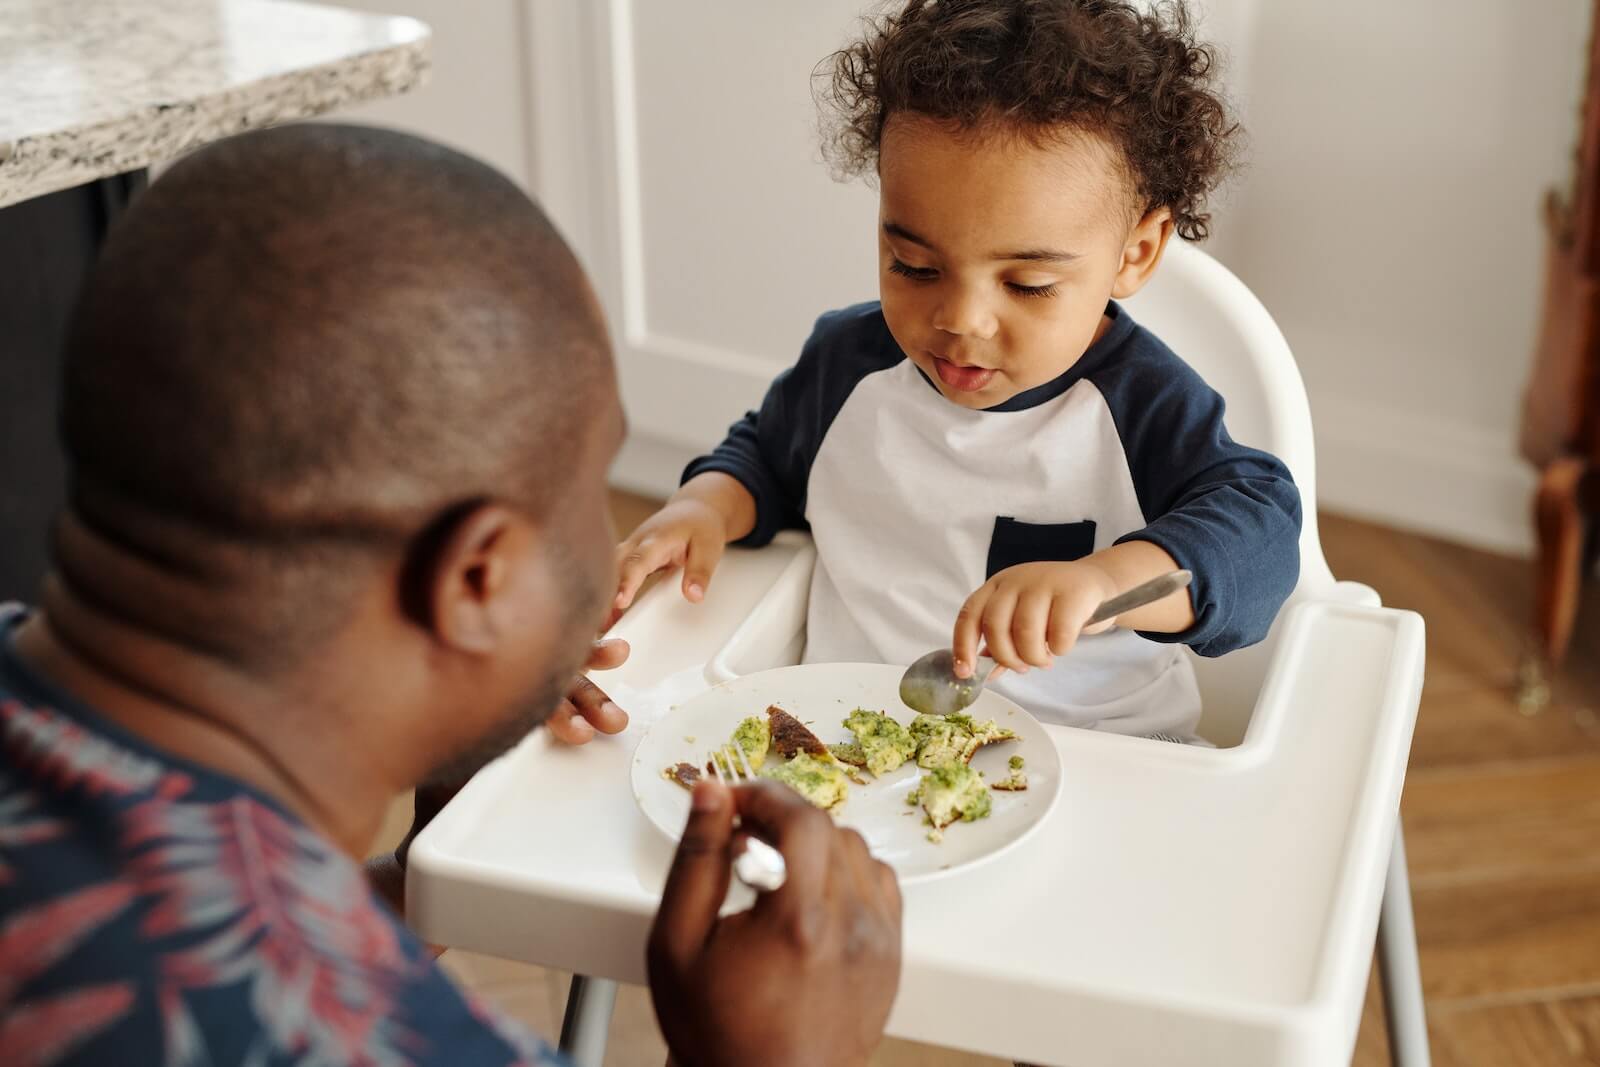 A father feeding a baby in a high chair